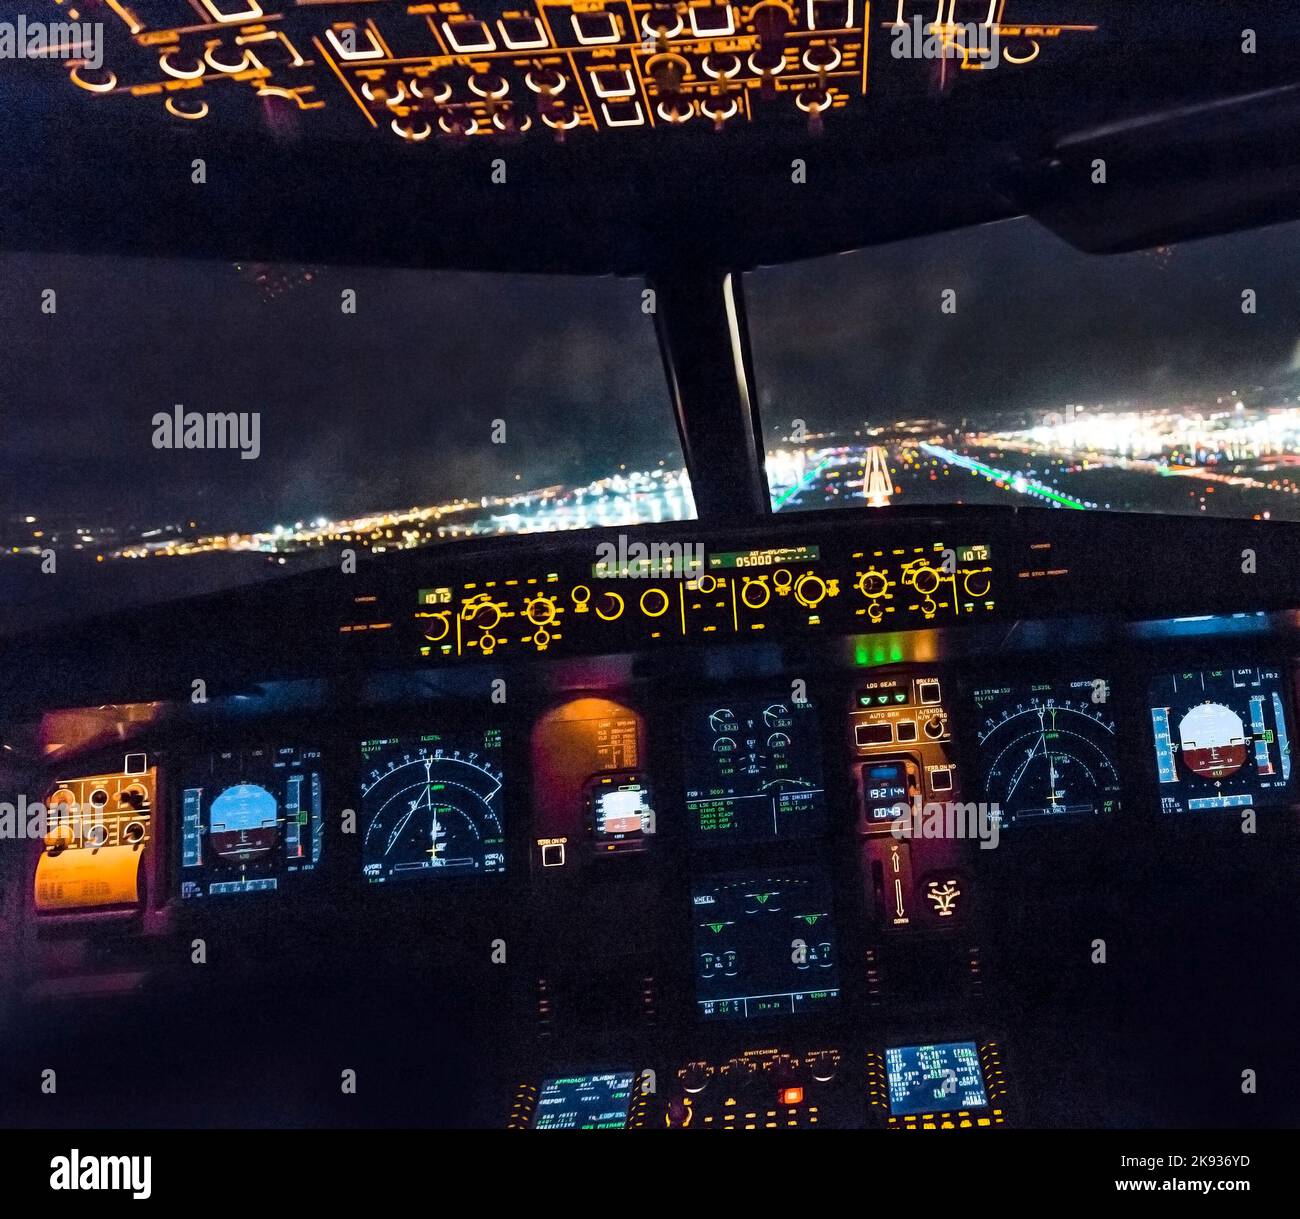 FRANKFURT, GERMANY - OCT 10, 2014: landing by night with a commercaial aircraft A320 at the airport of Frankfurt, Germany. Stock Photo